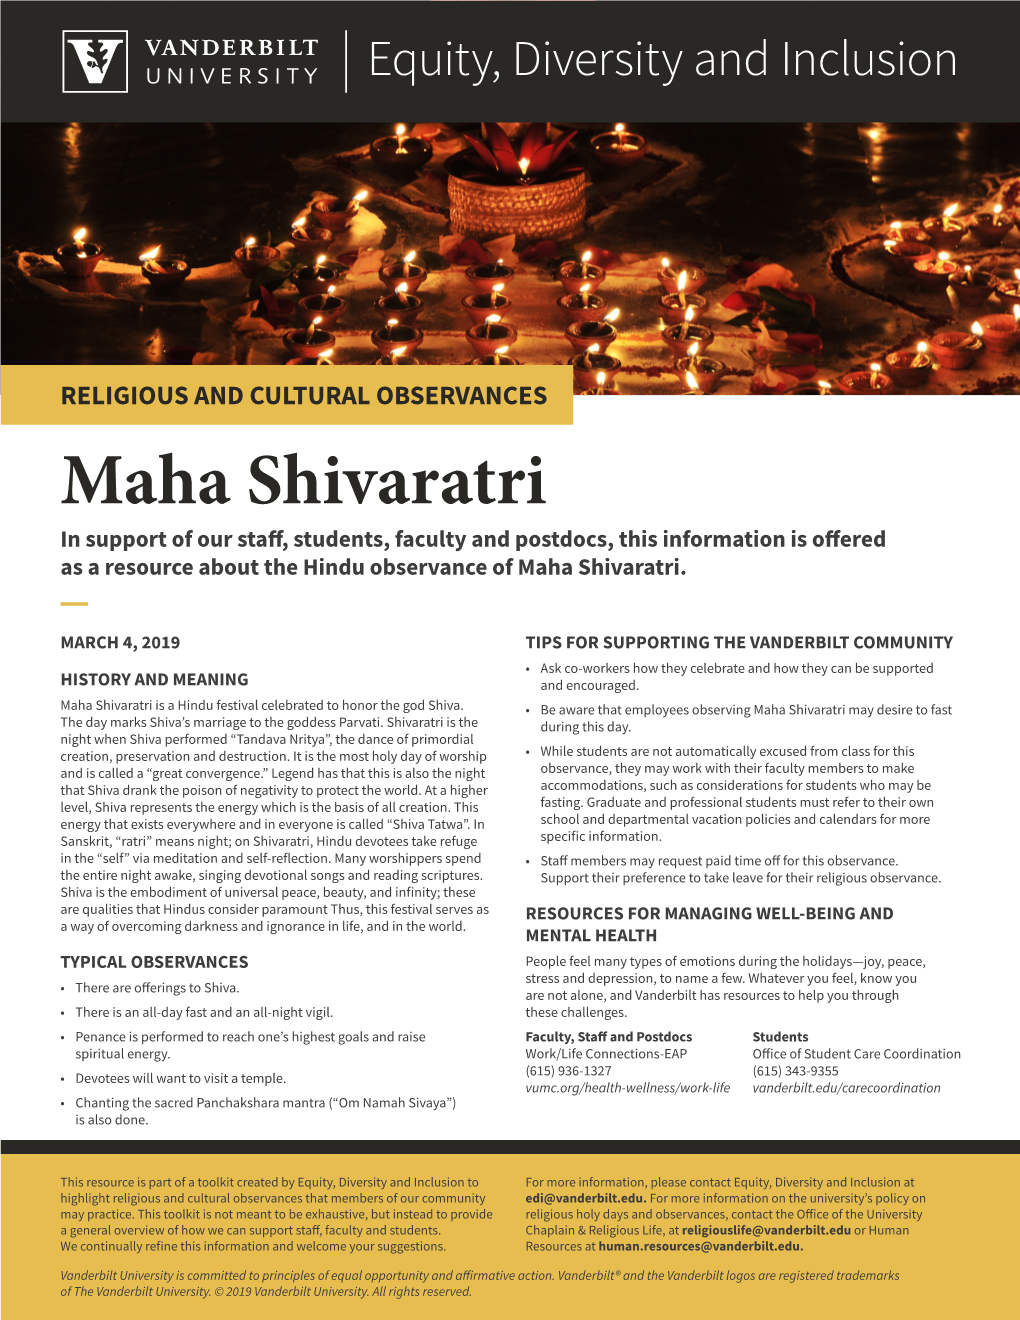 Maha Shivaratri in Support of Our Staff, Students, Faculty and Postdocs, This Information Is Offered As a Resource About the Hindu Observance of Maha Shivaratri